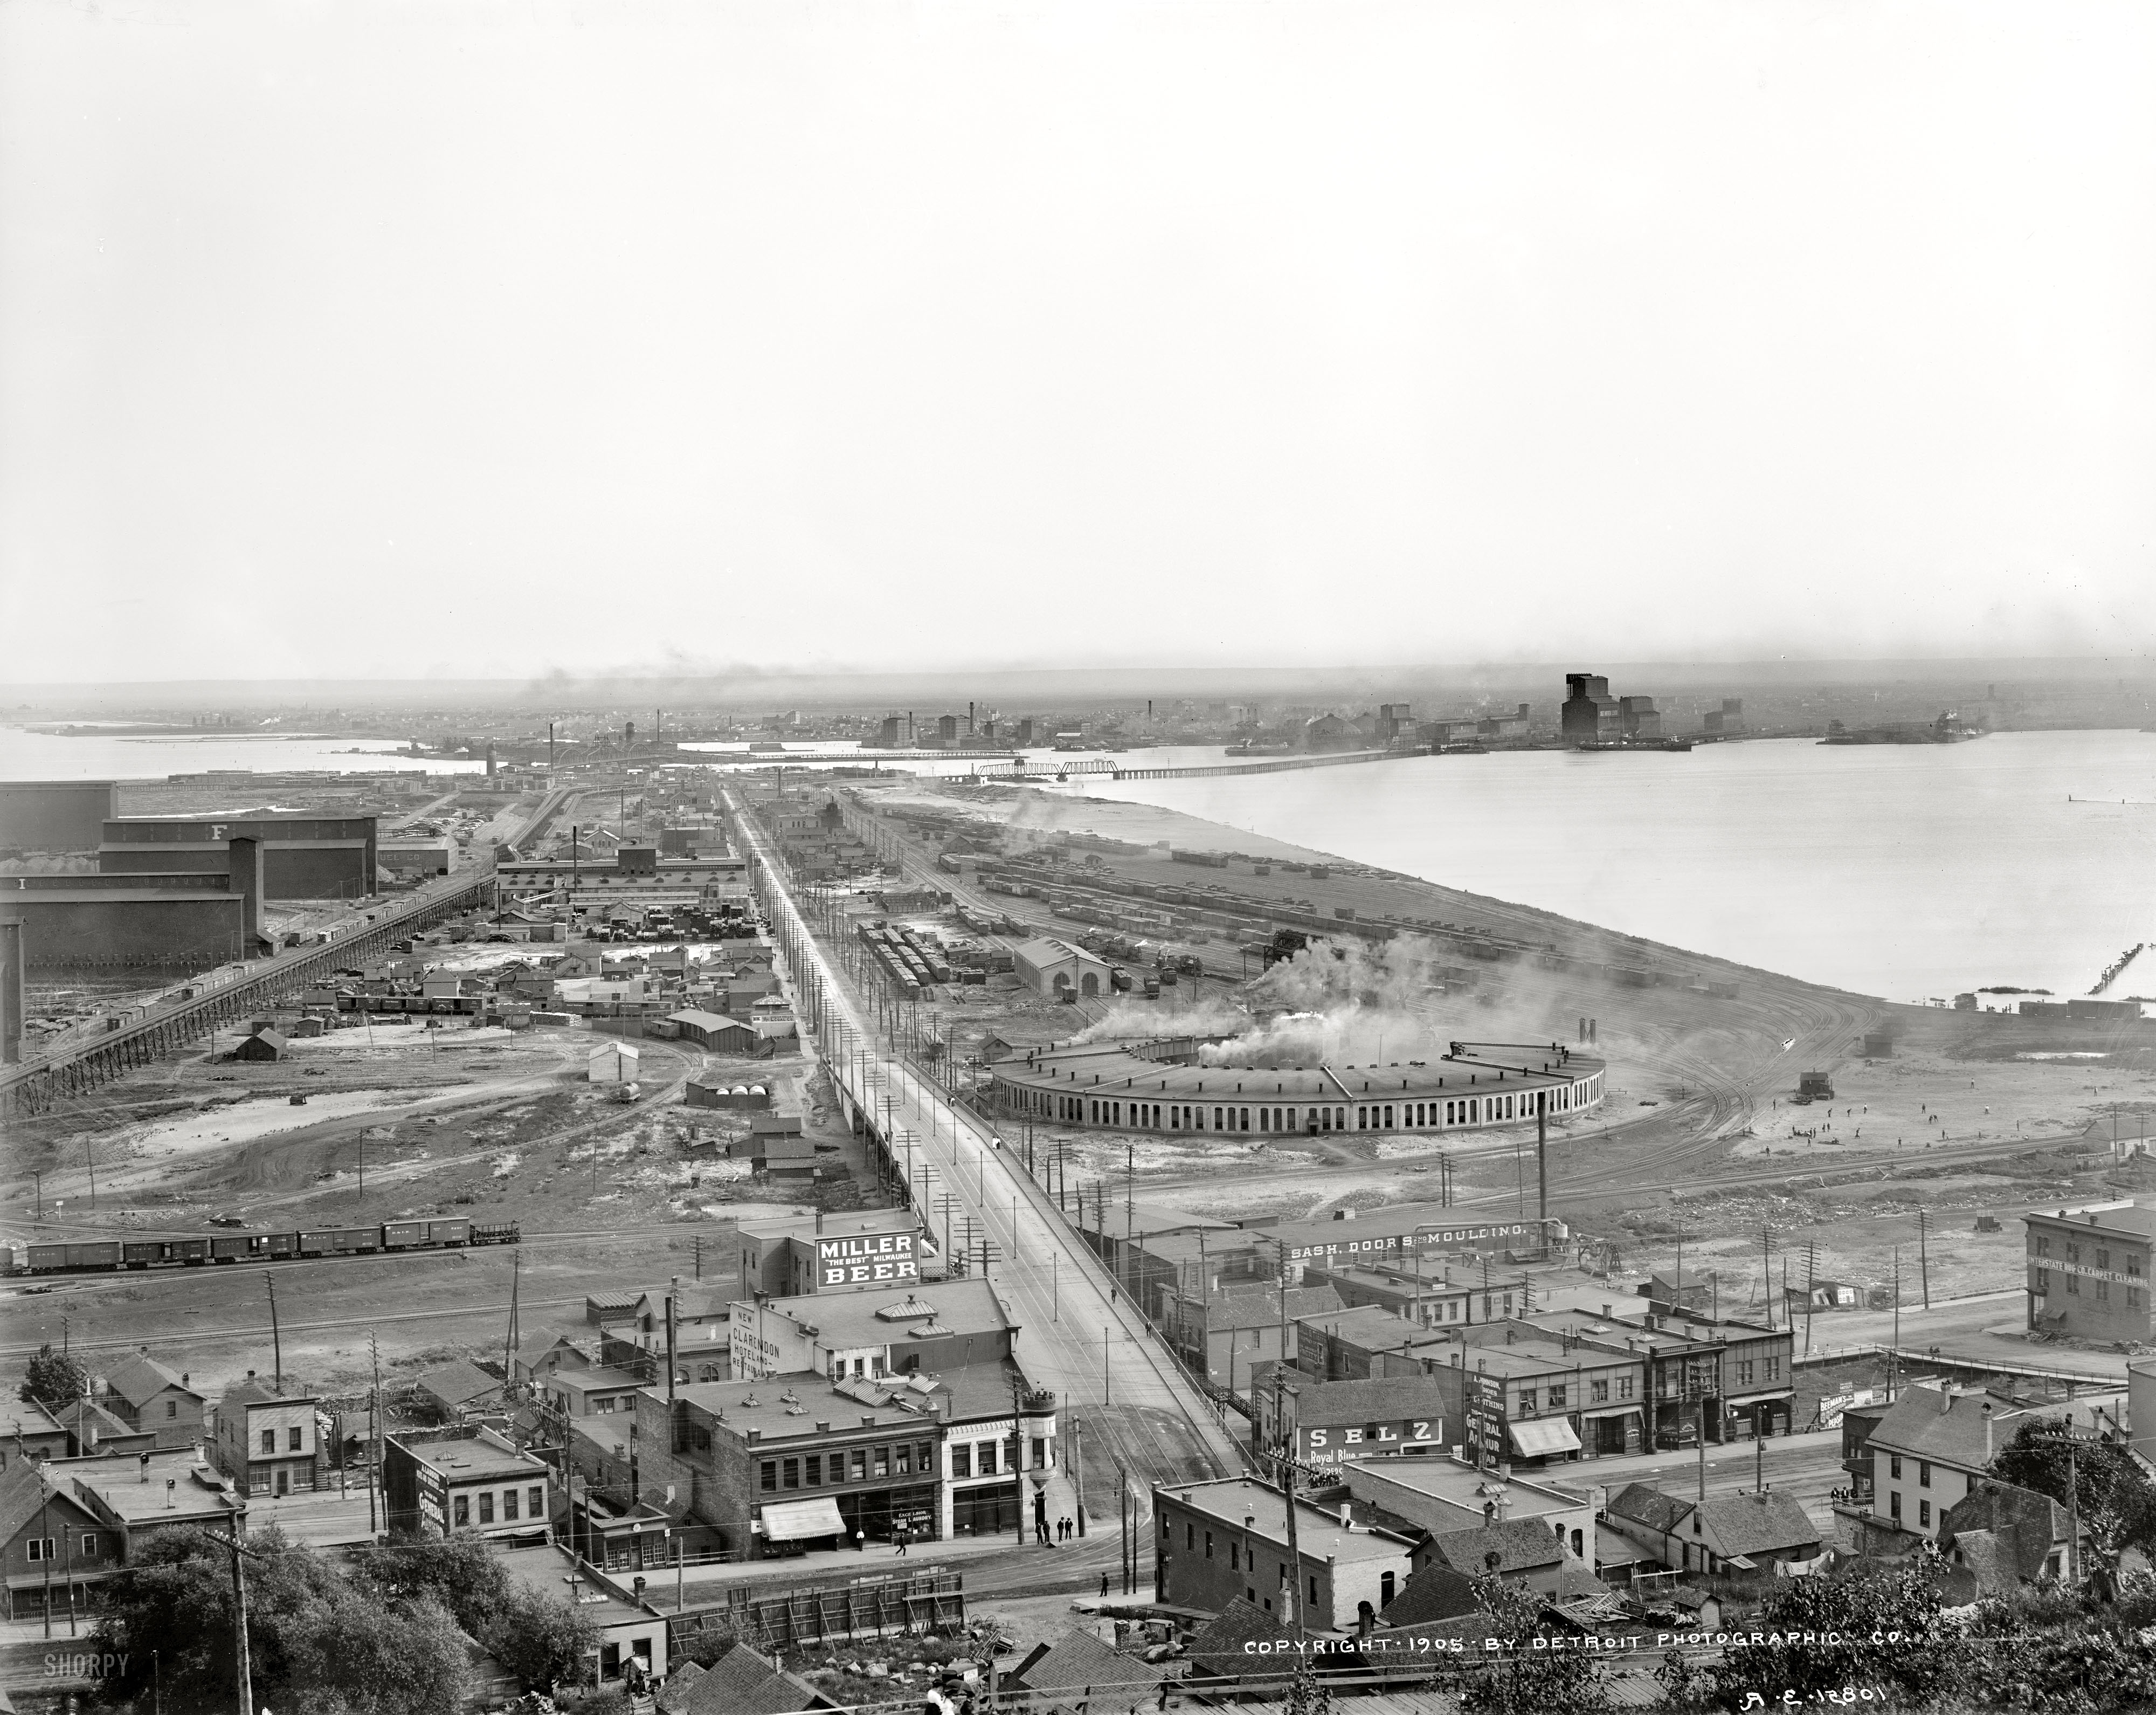 Duluth, Minnesota, circa 1905. "Elevators and harbor," along with a view of the Incline Railway and many other points of interest, make up our daily dose of Duluth. Detroit Publishing Company glass negative. View full size.